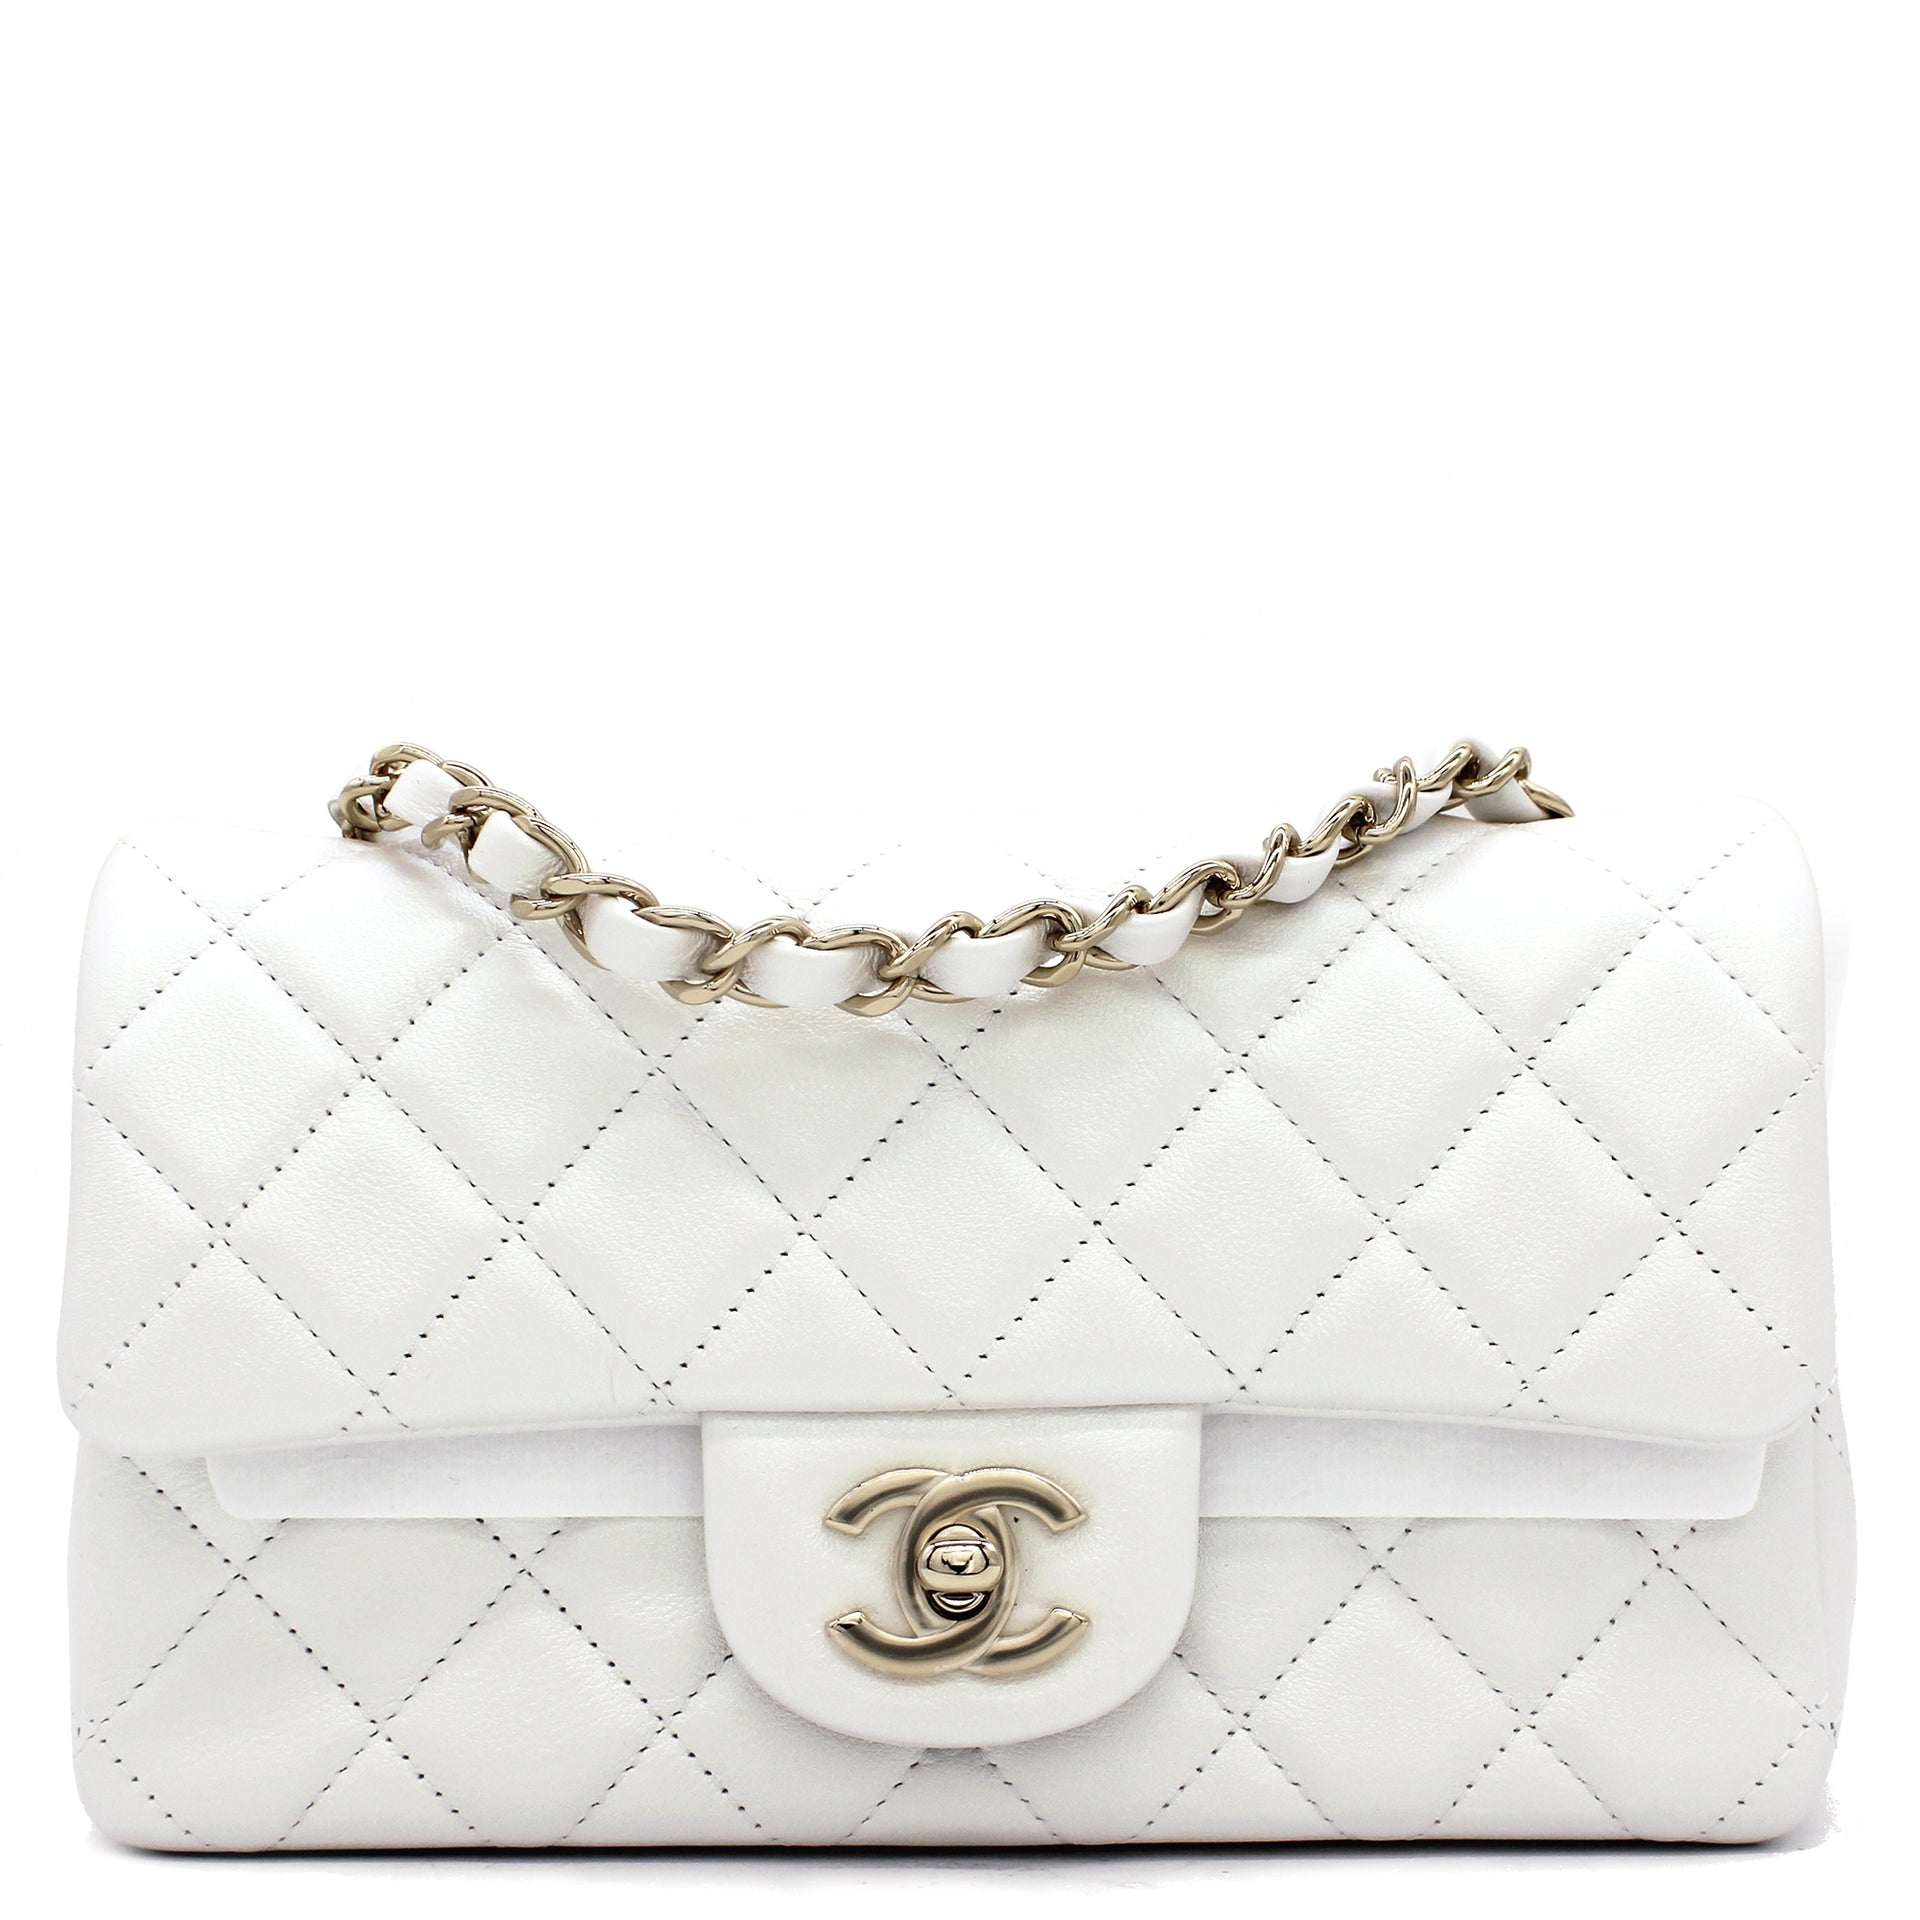 Chanel Calfskin Quilted Handbag  Bowling Bag Style White